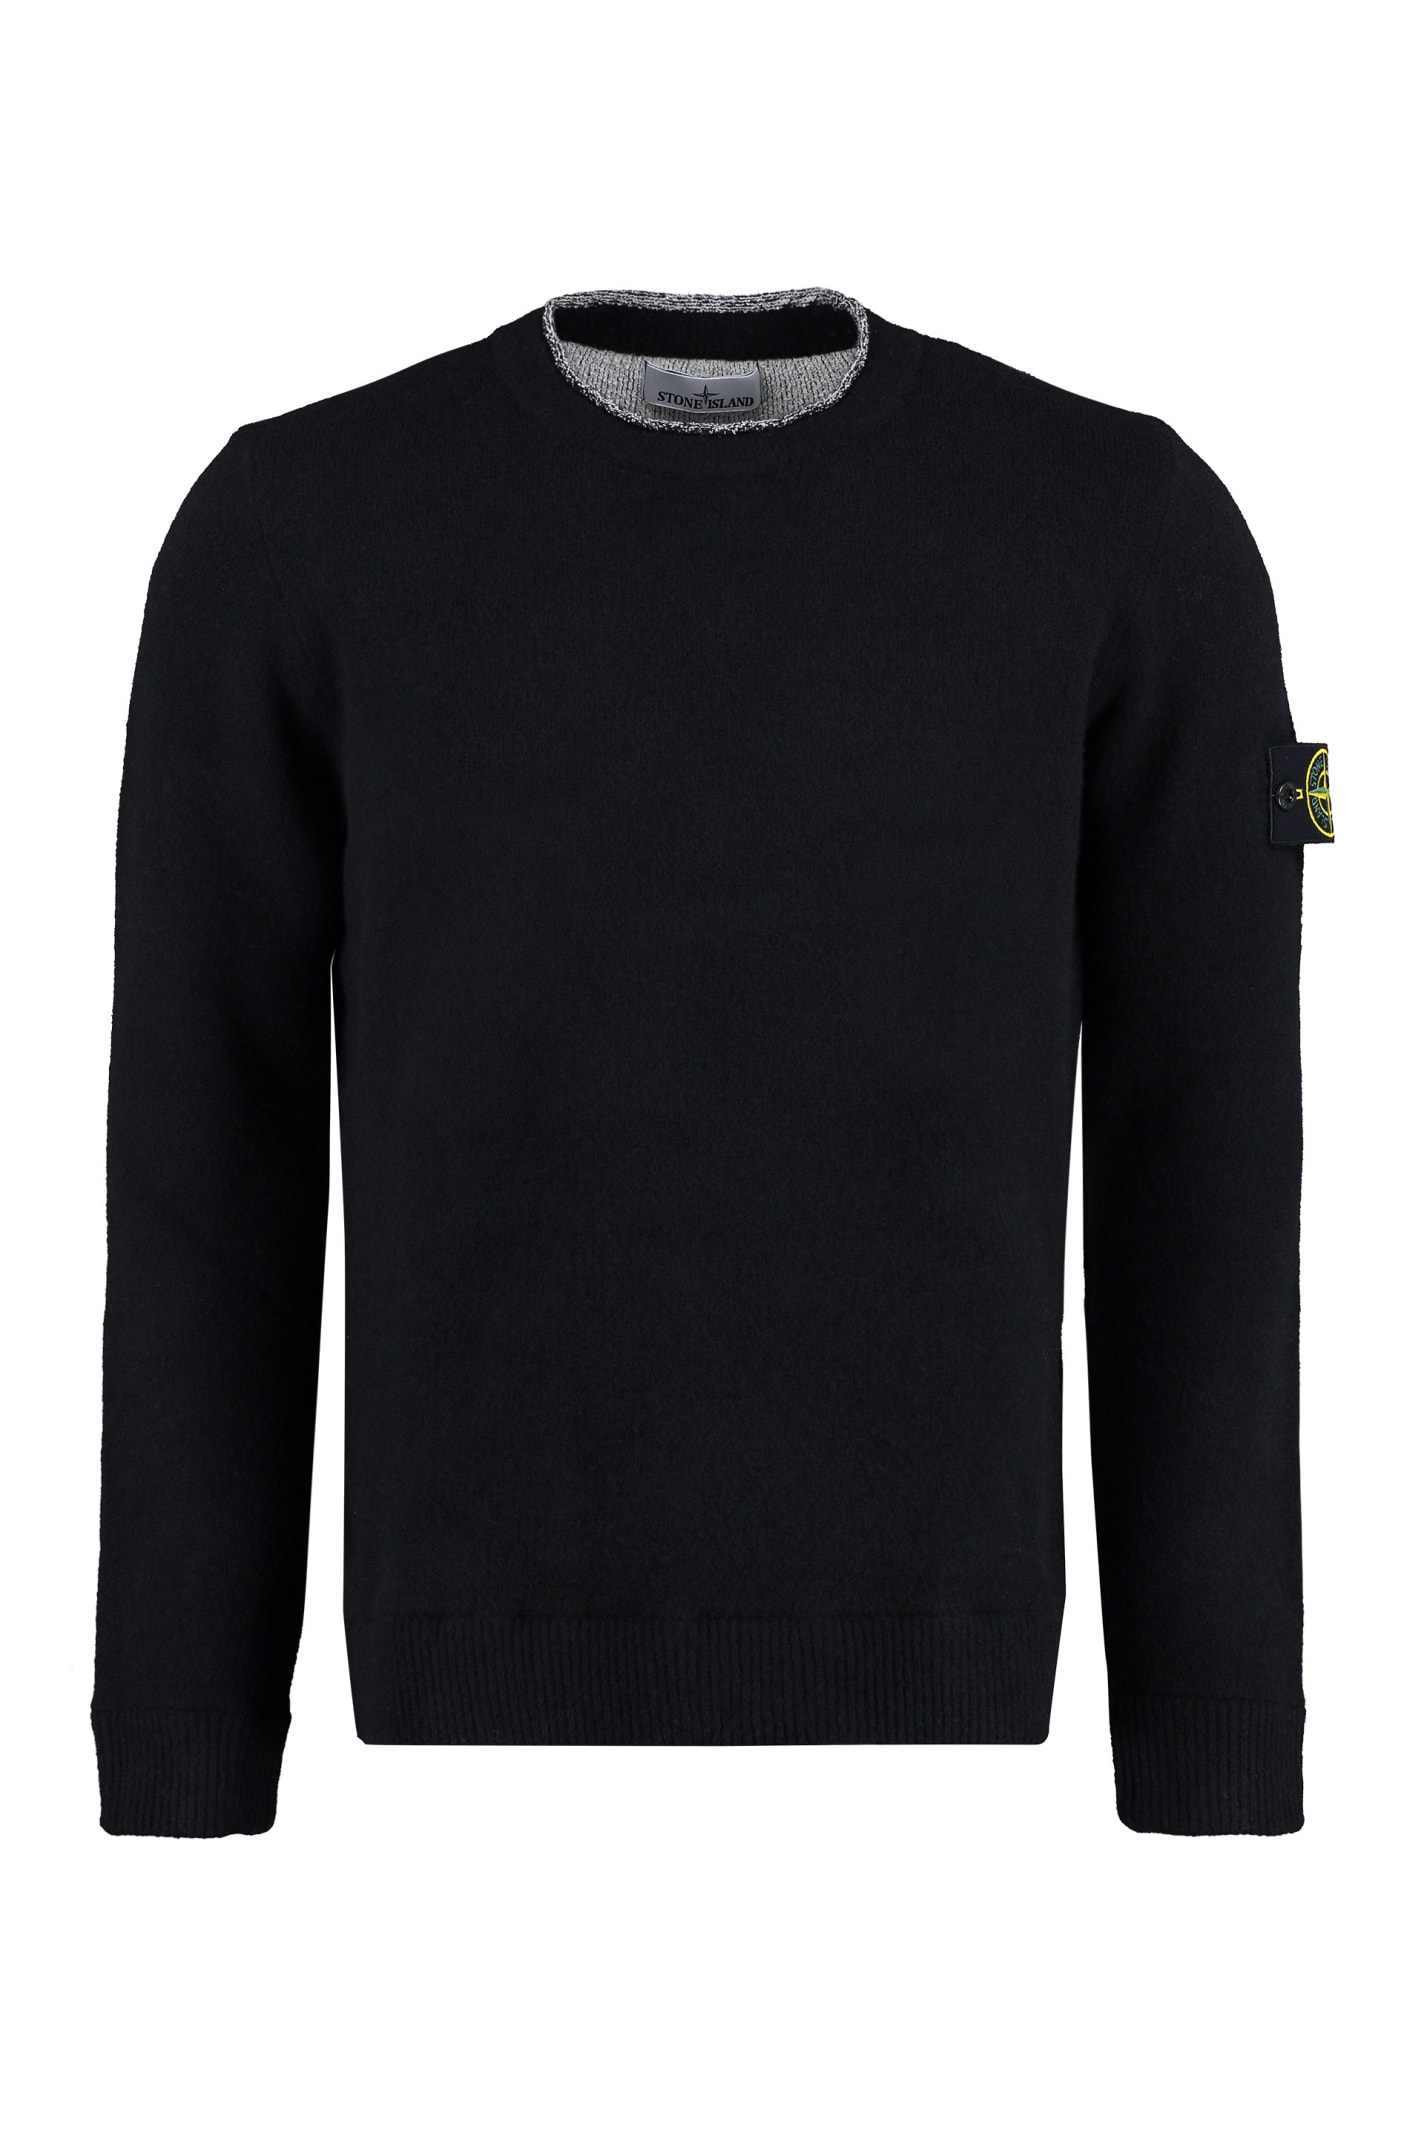 Stone Island Wool Blend Pullover